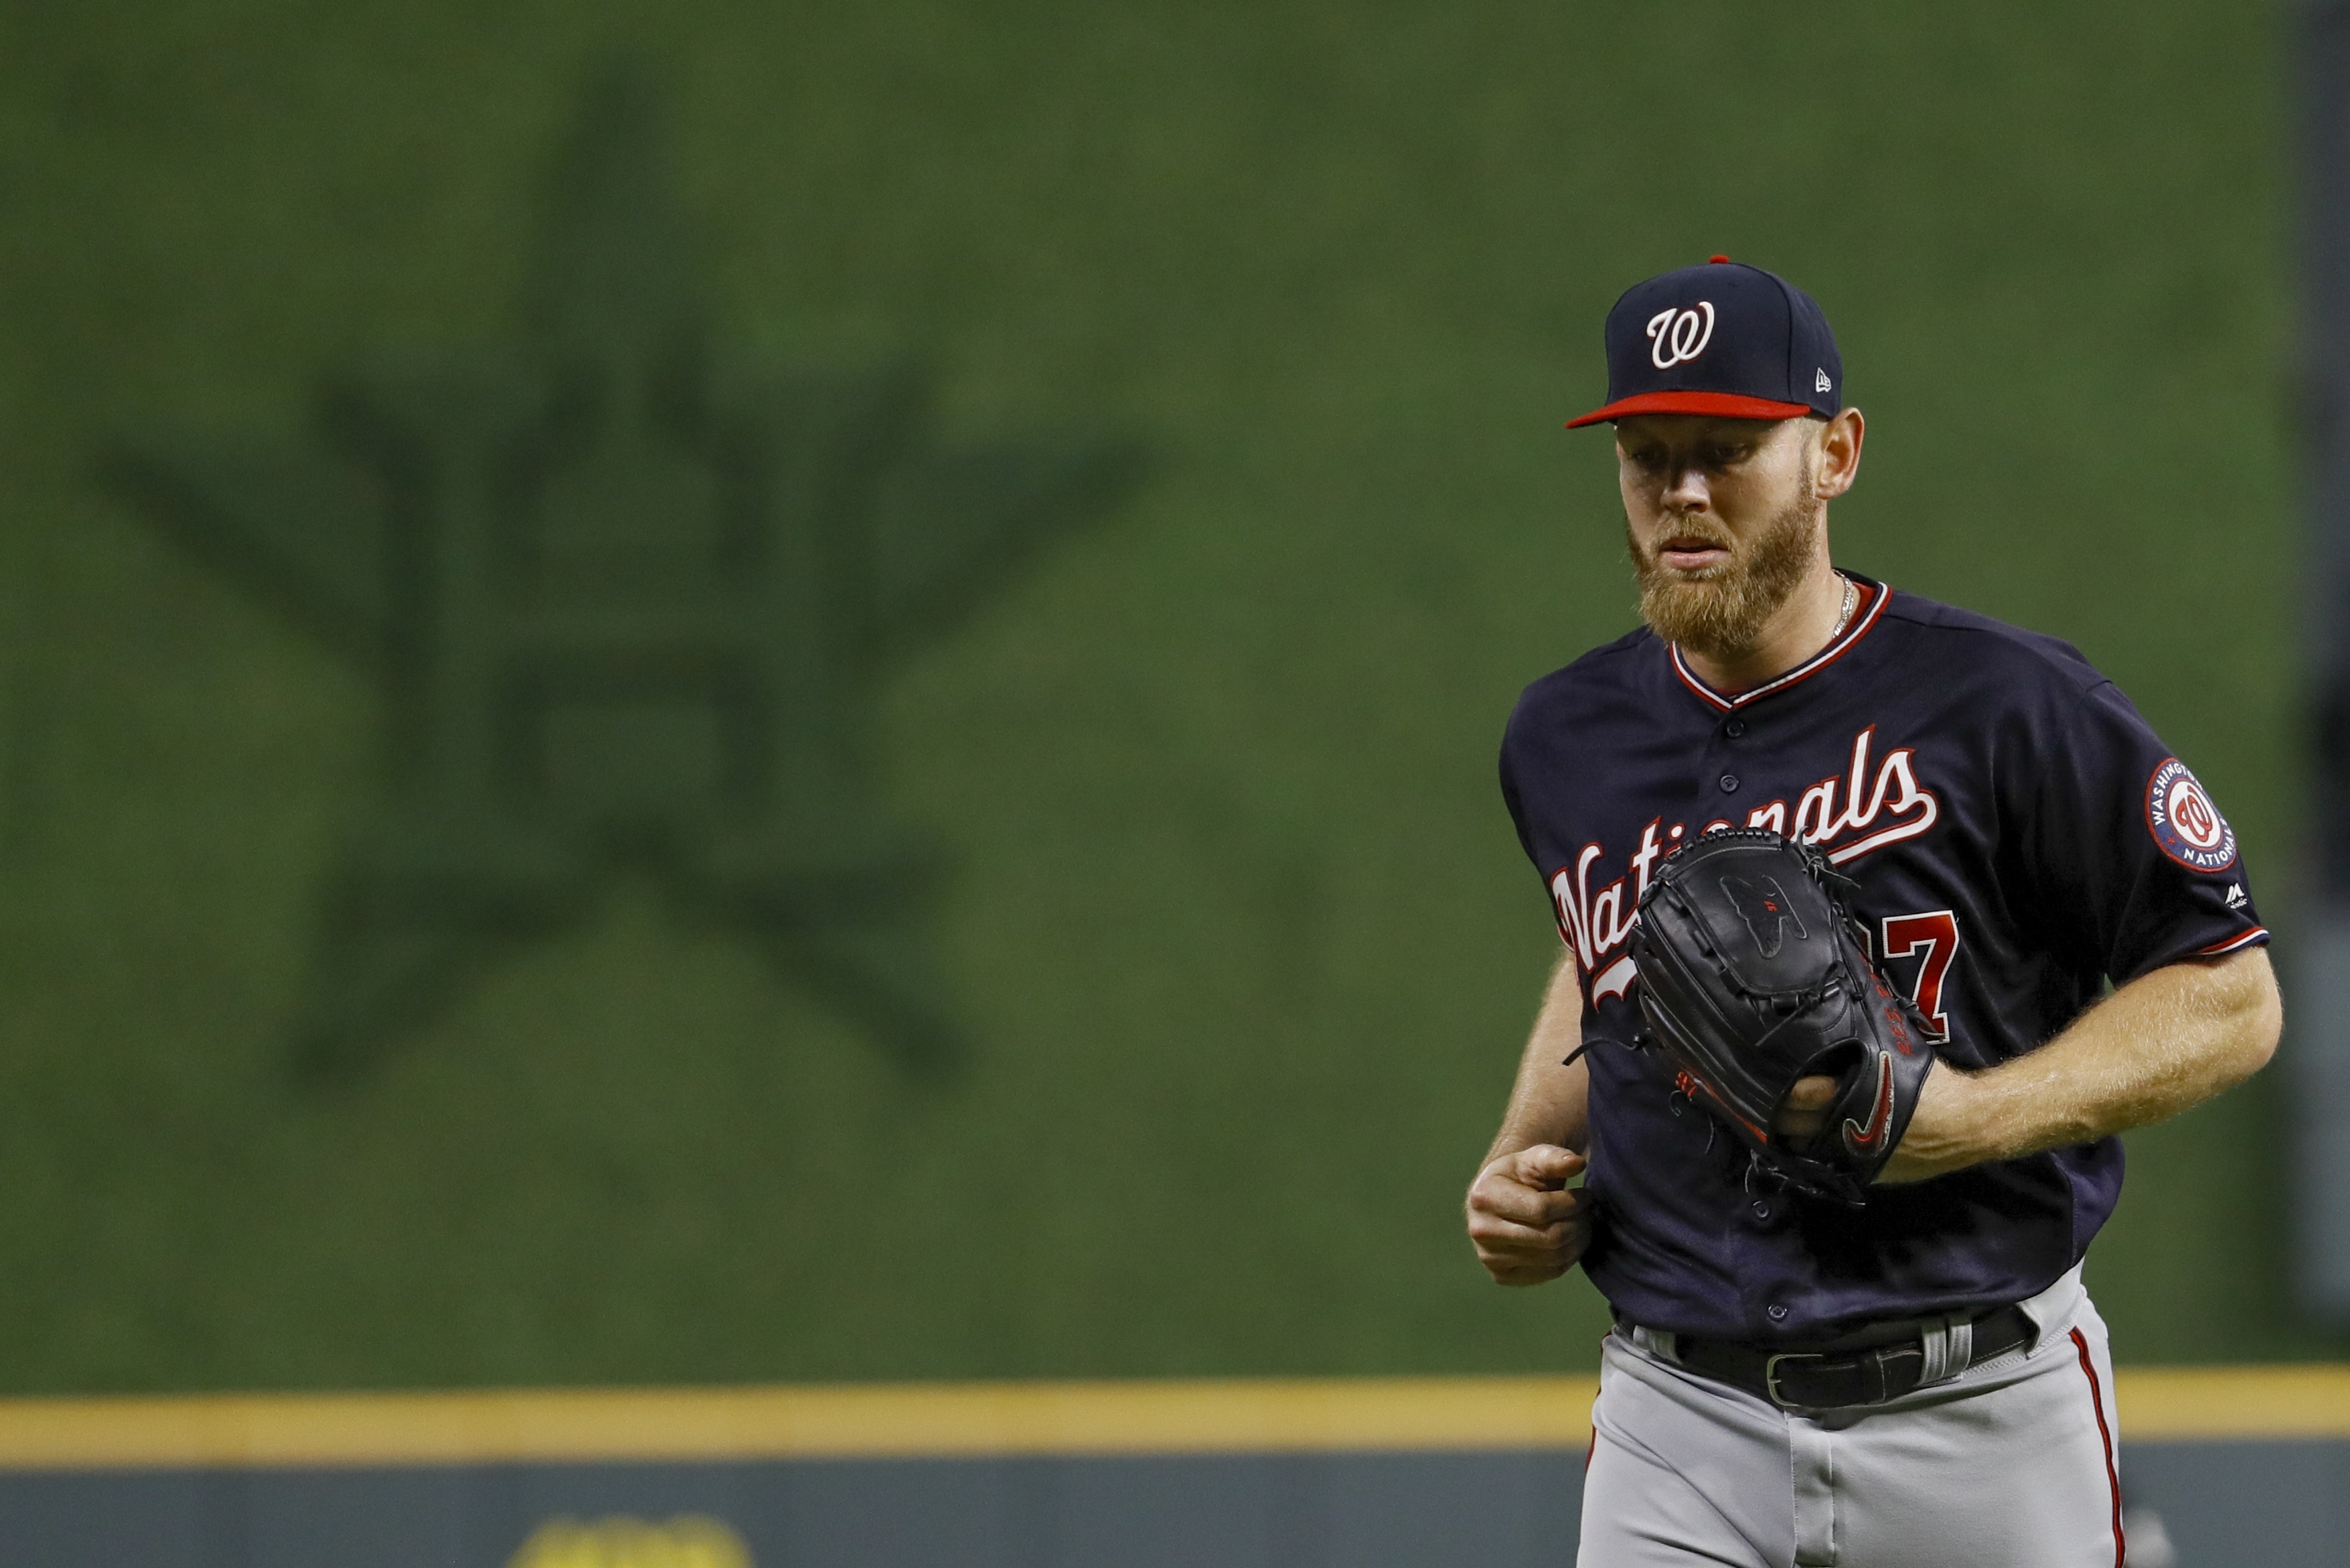 Stephen Strasburg signs seven-year, $245 million deal with